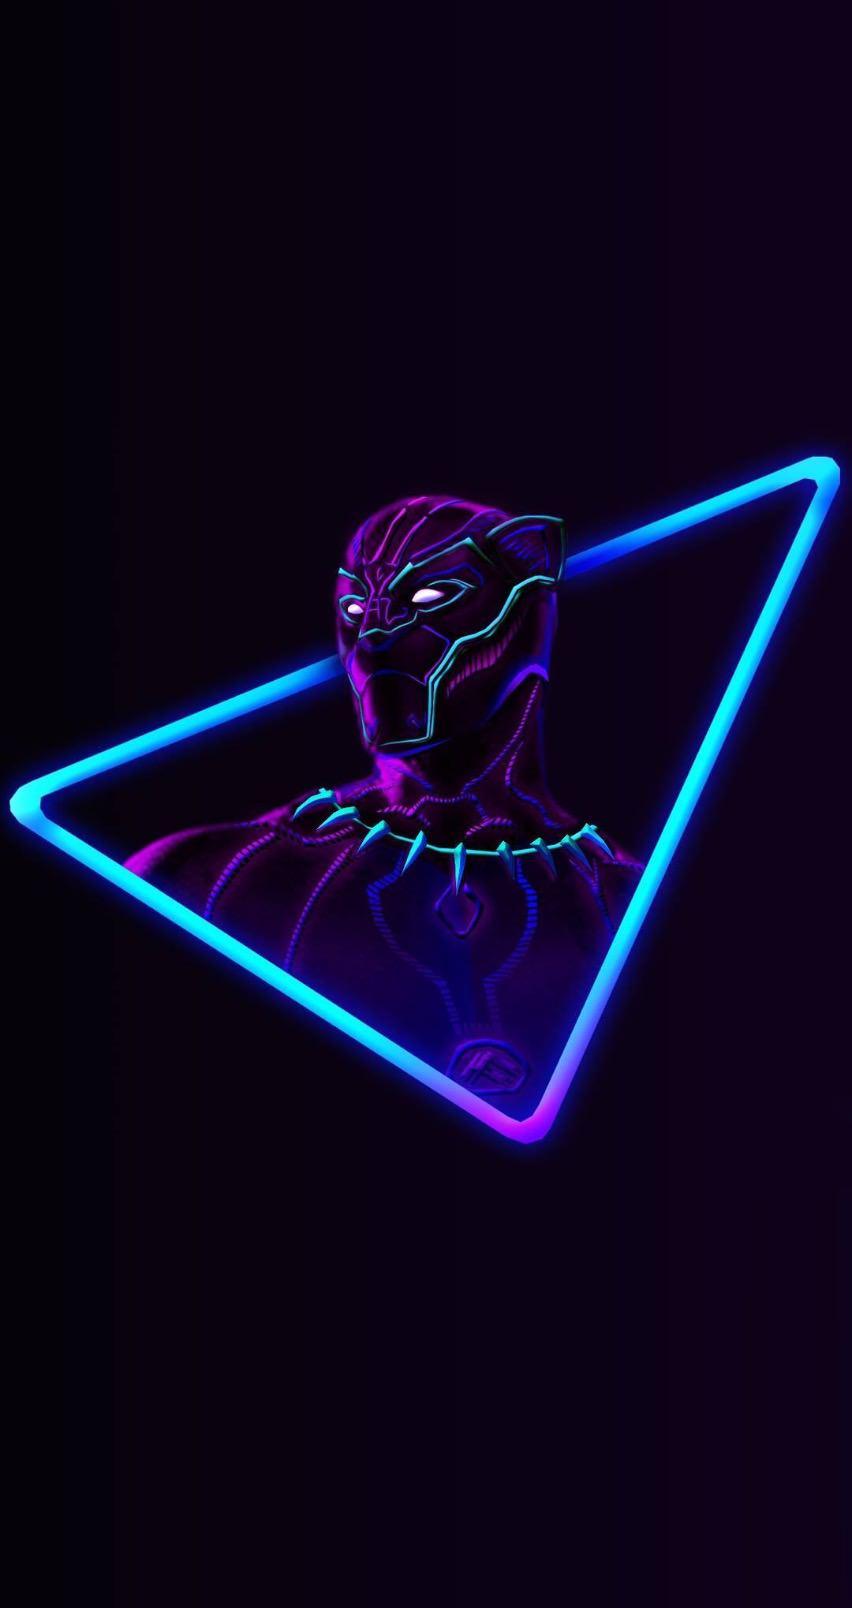 Neon Avengers Parallax Wallpaper For iPhone 8 iPhone X